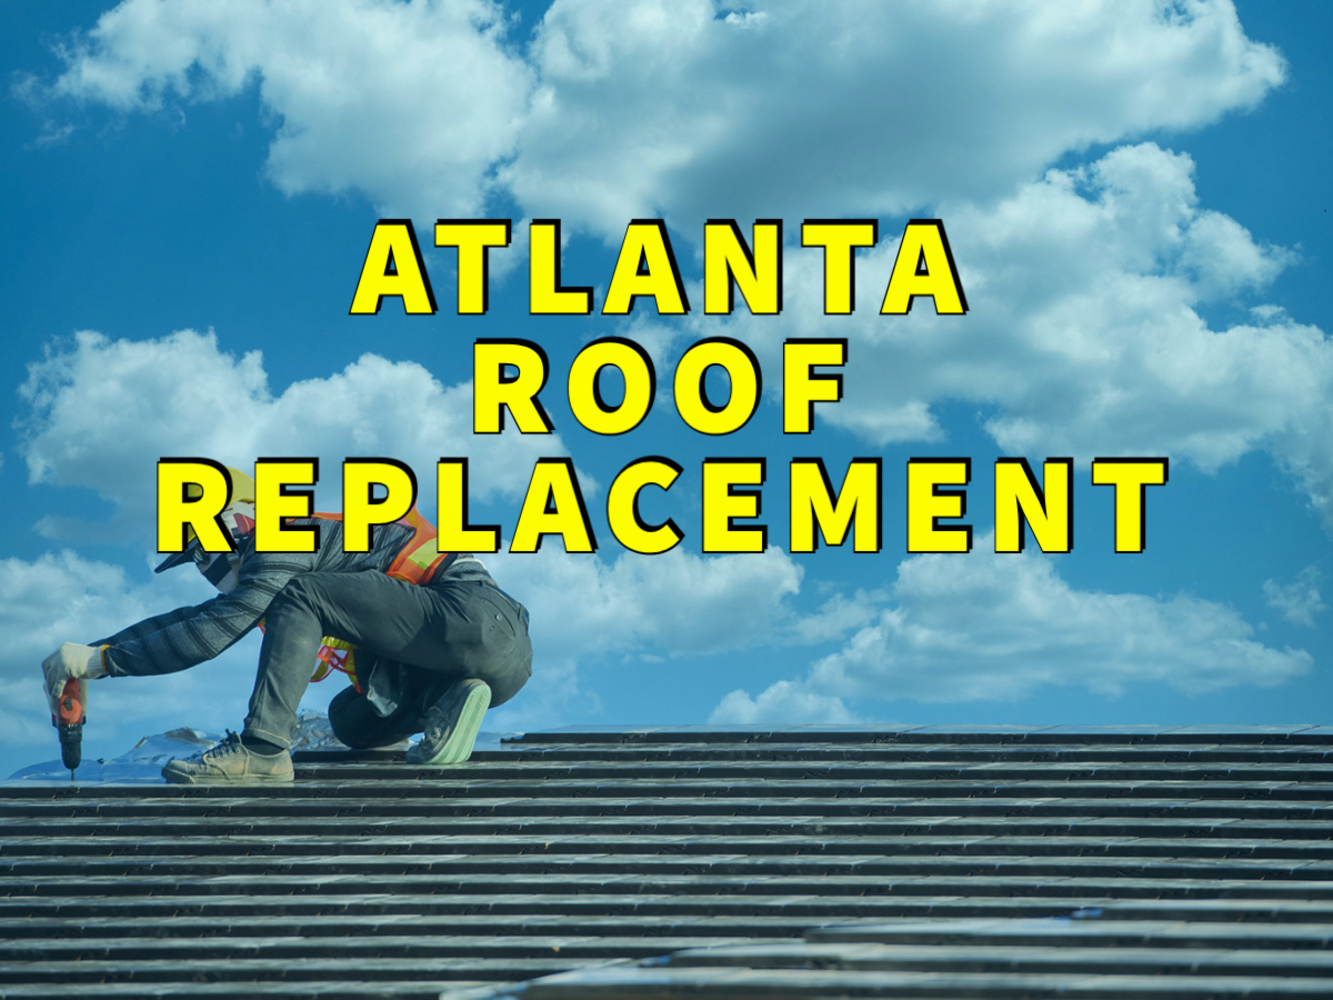 Atlanta roof replacement written in yellow with blue sky in the background while man works on roof beneath letters